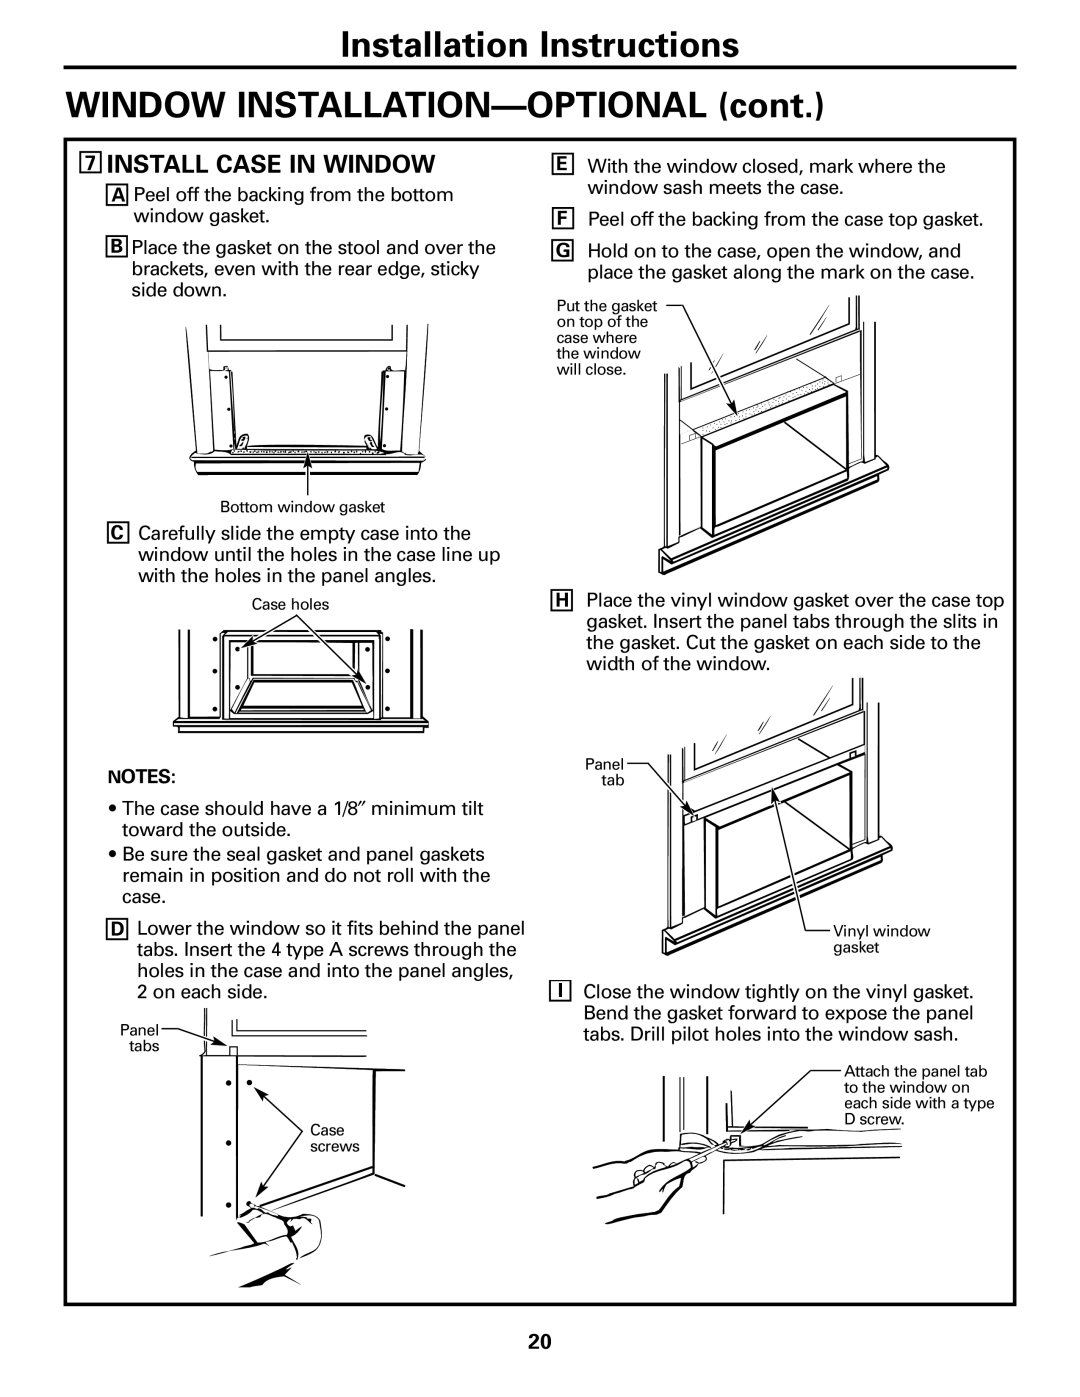 GE AJHS10DCC installation instructions Installation Instructions, WINDOW INSTALLATION—OPTIONALcont, 7INSTALL CASE IN WINDOW 